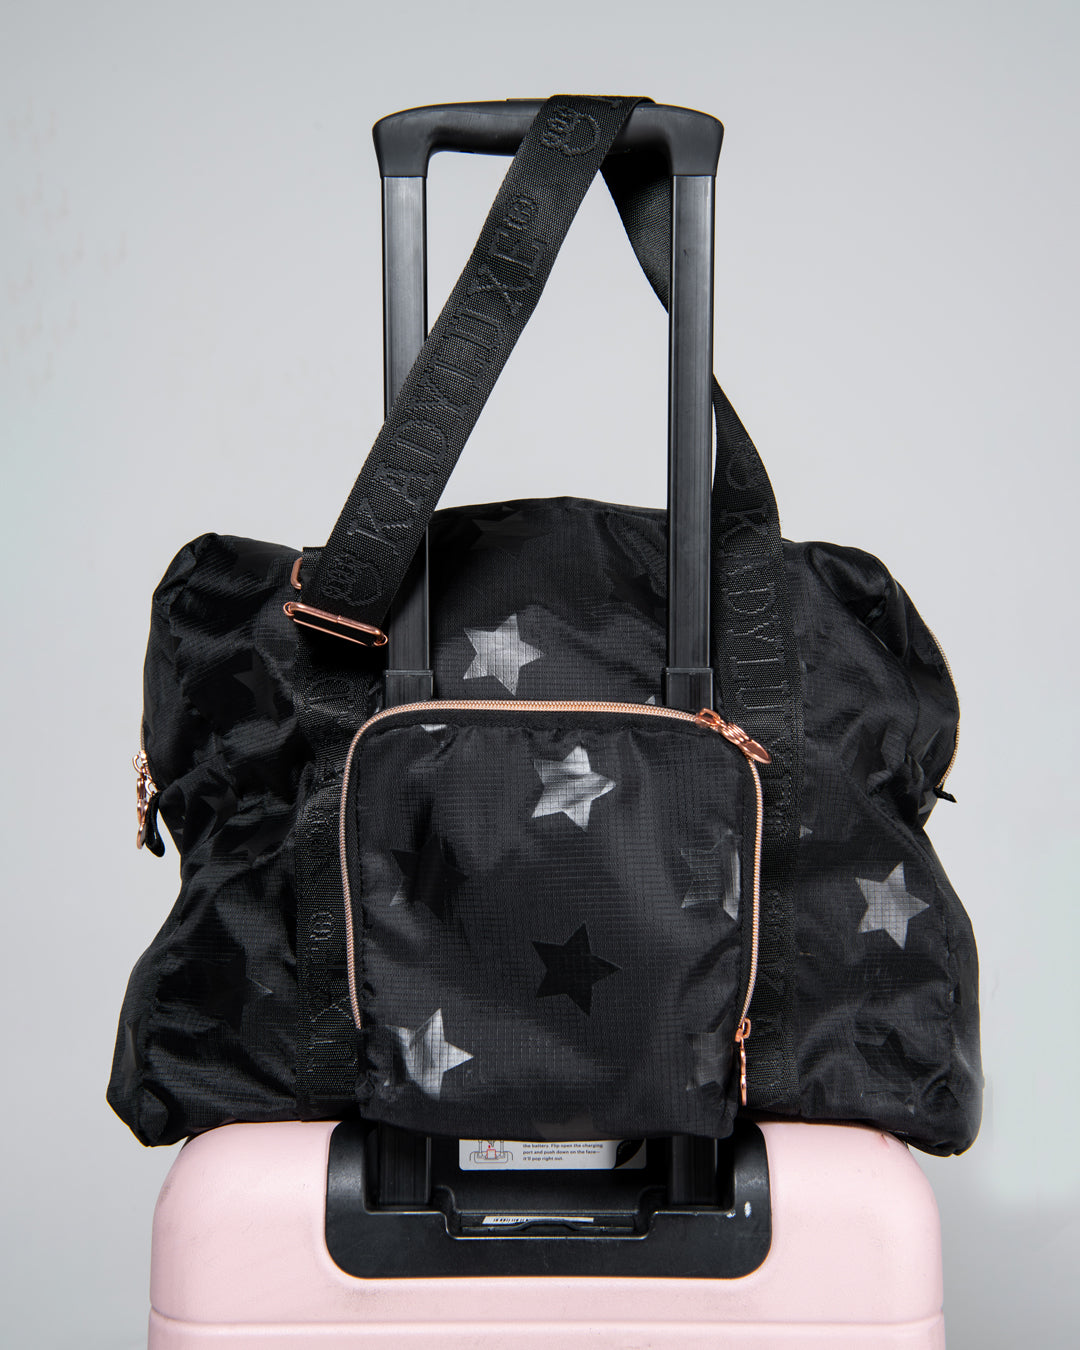 KADYLUXE® packable travel bag in black star print close up view.